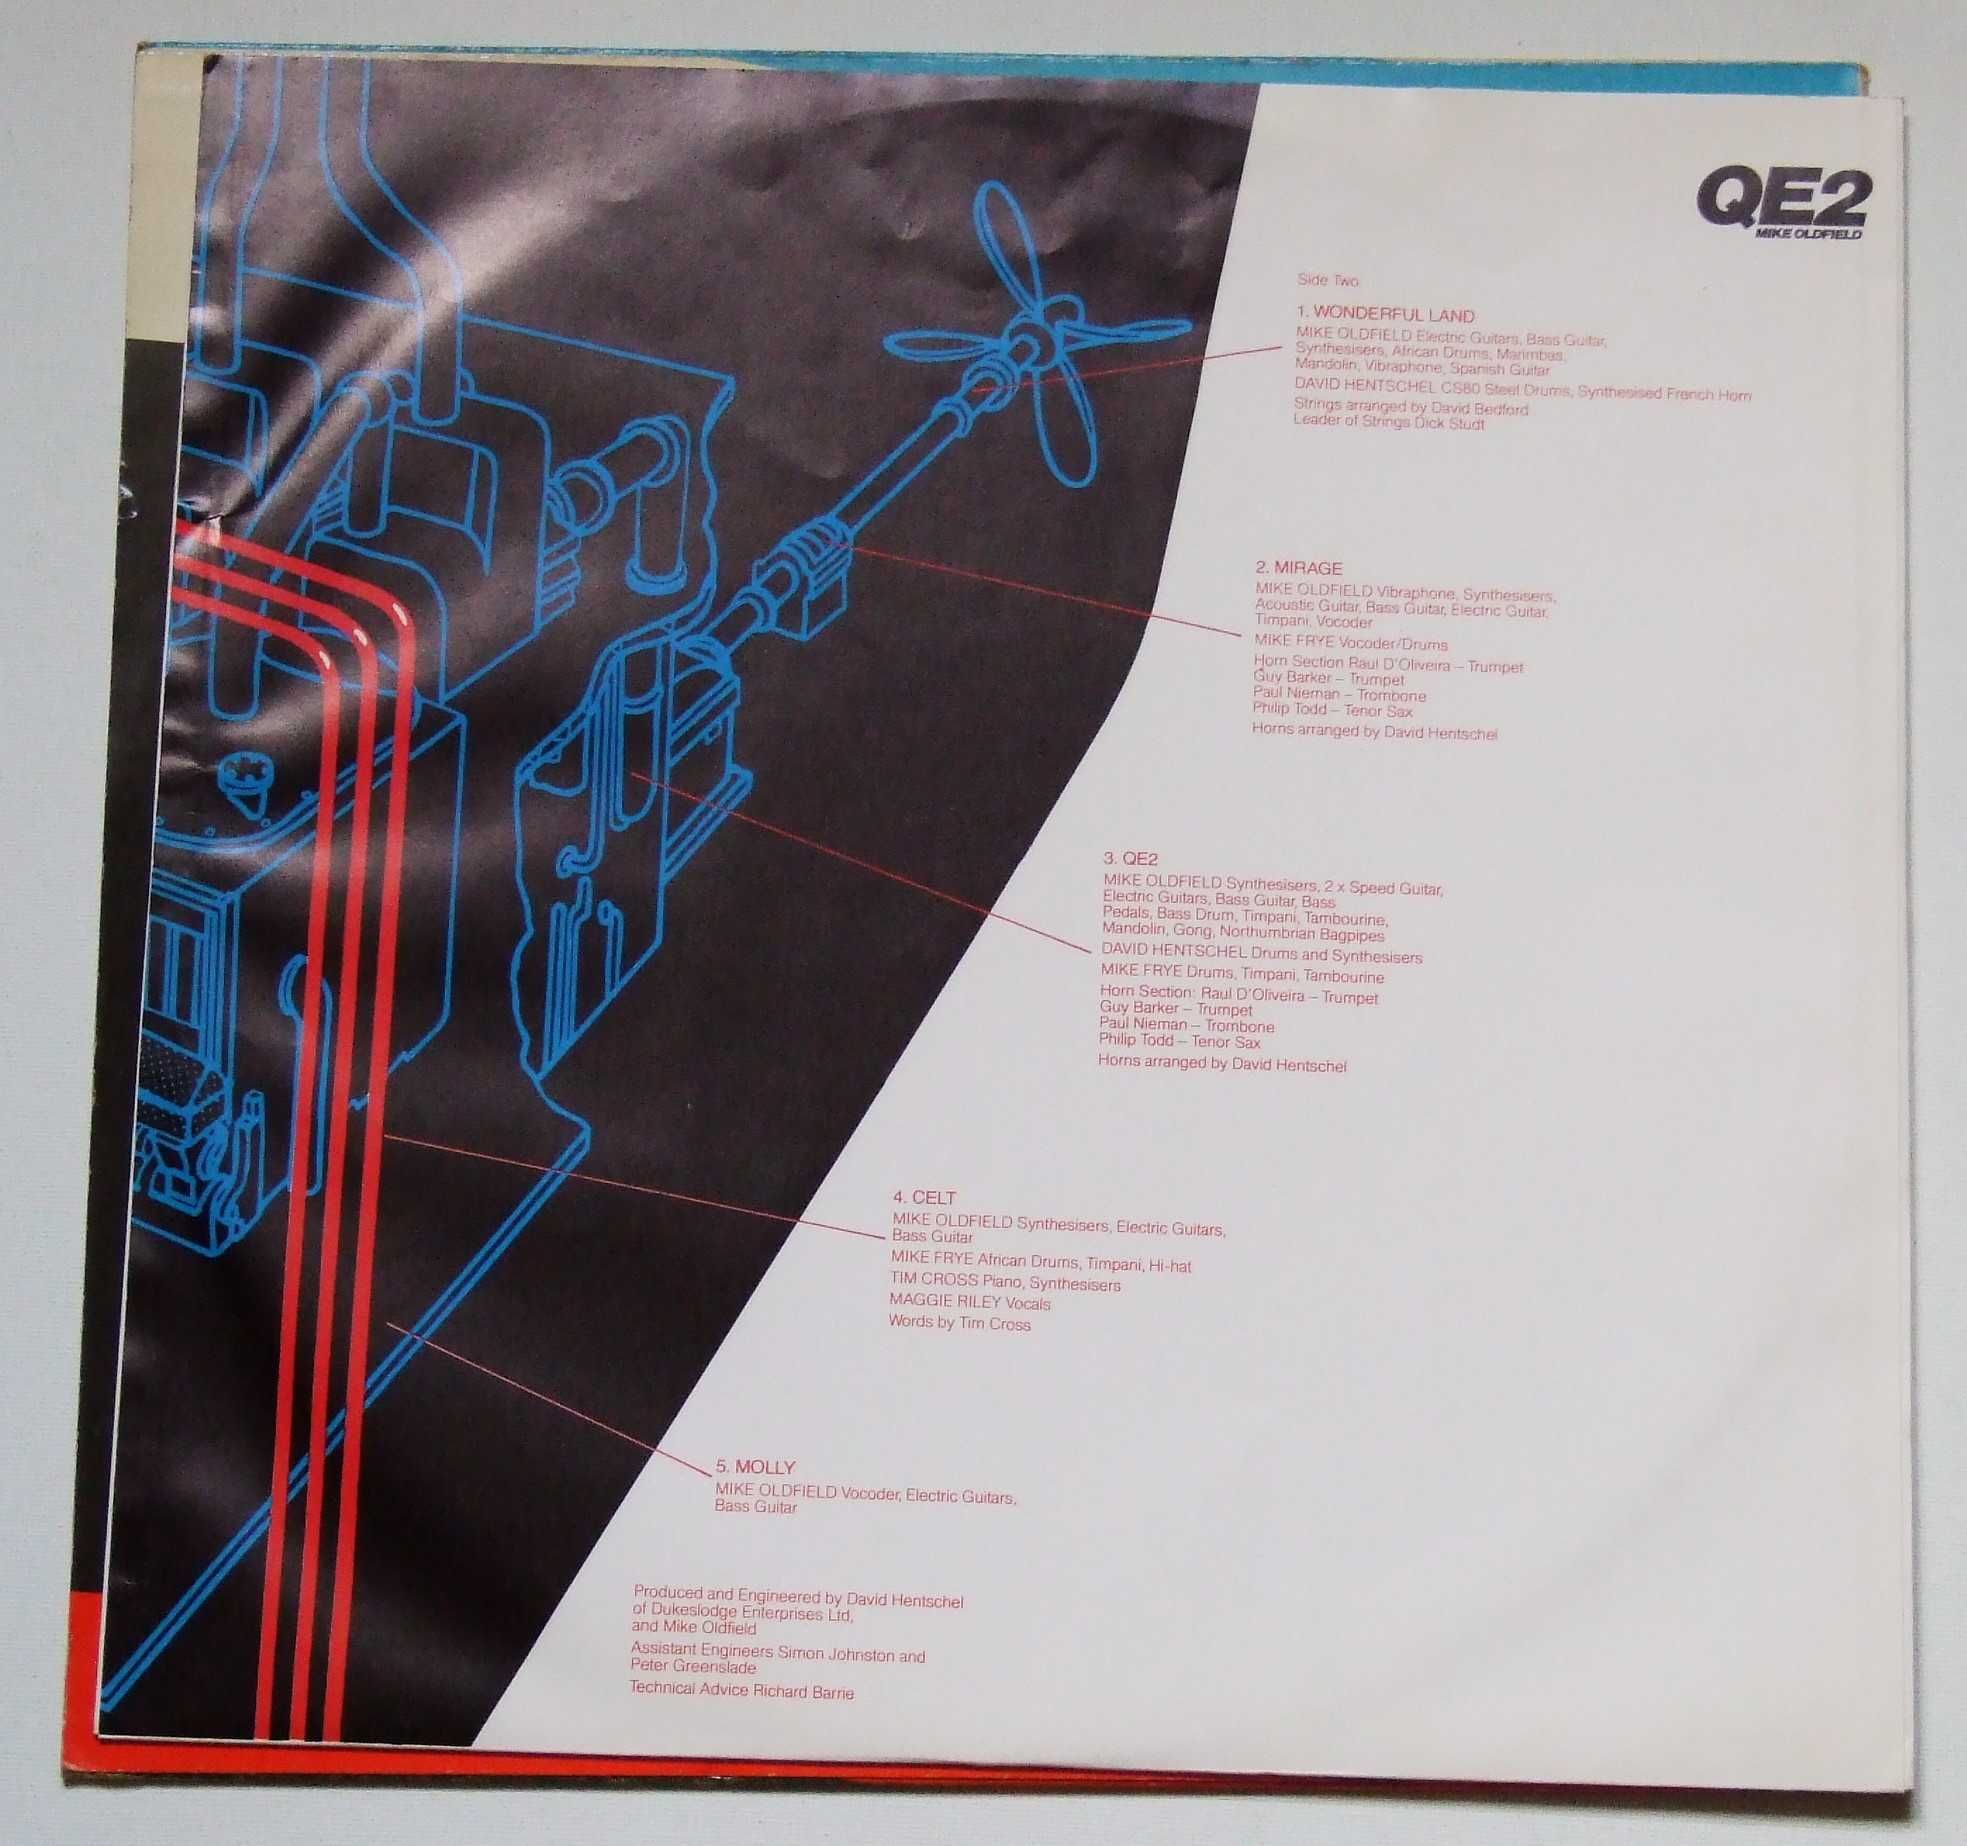 Mike Oldfield – QE2